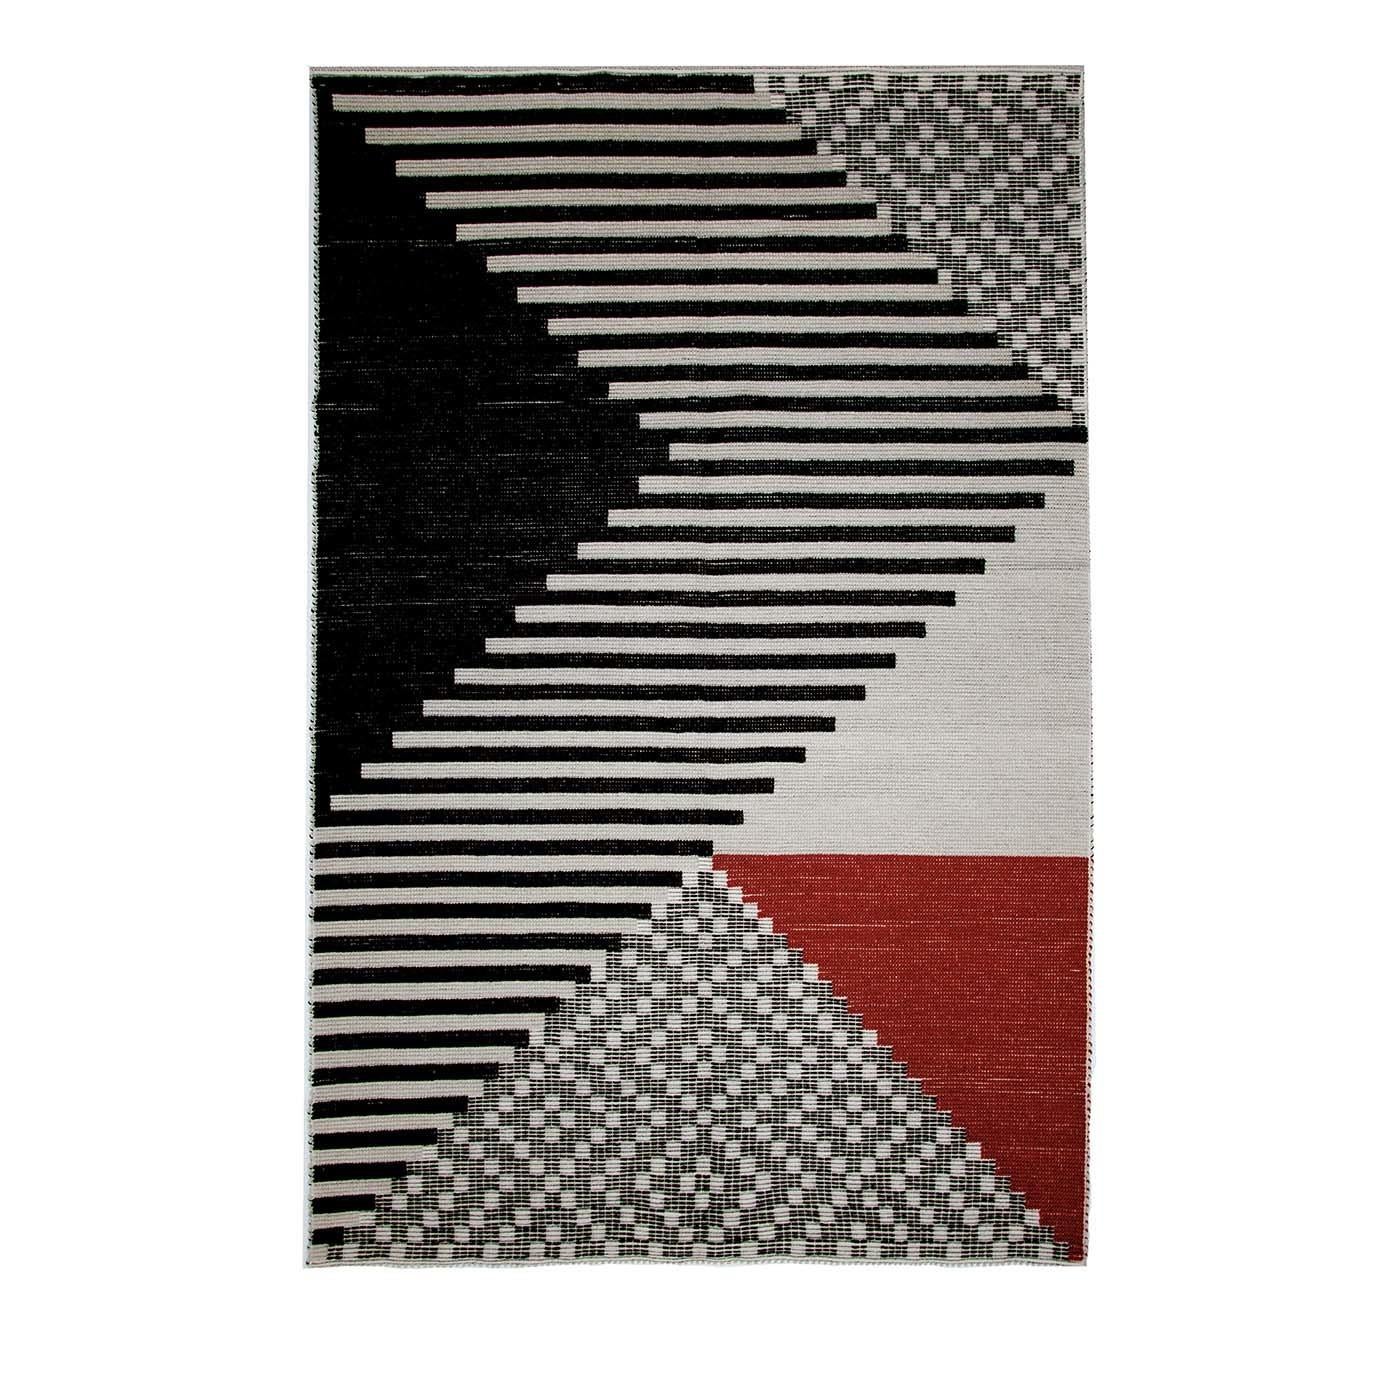 Designed by Inveloveritas exclusively for Extroverso, this exquisite rug in natural Sardinian wool is handmade on a loom by Mariantonia Urru using the traditional Sardinian pibiones and litzos techniques. Triangular shapes in different geometric